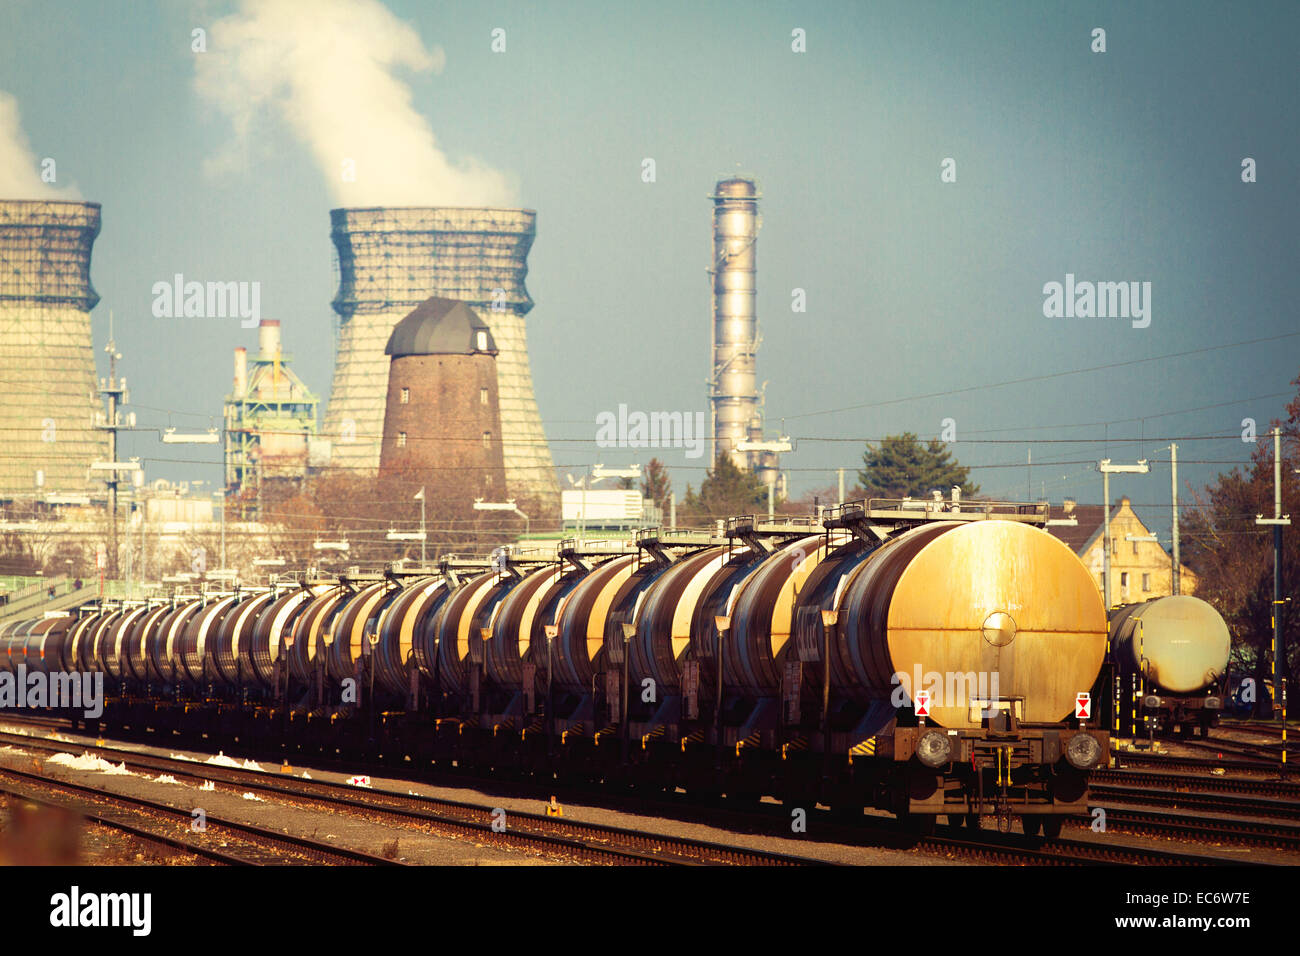 Freight station in the industrial area, tankers and cooling towers Stock Photo